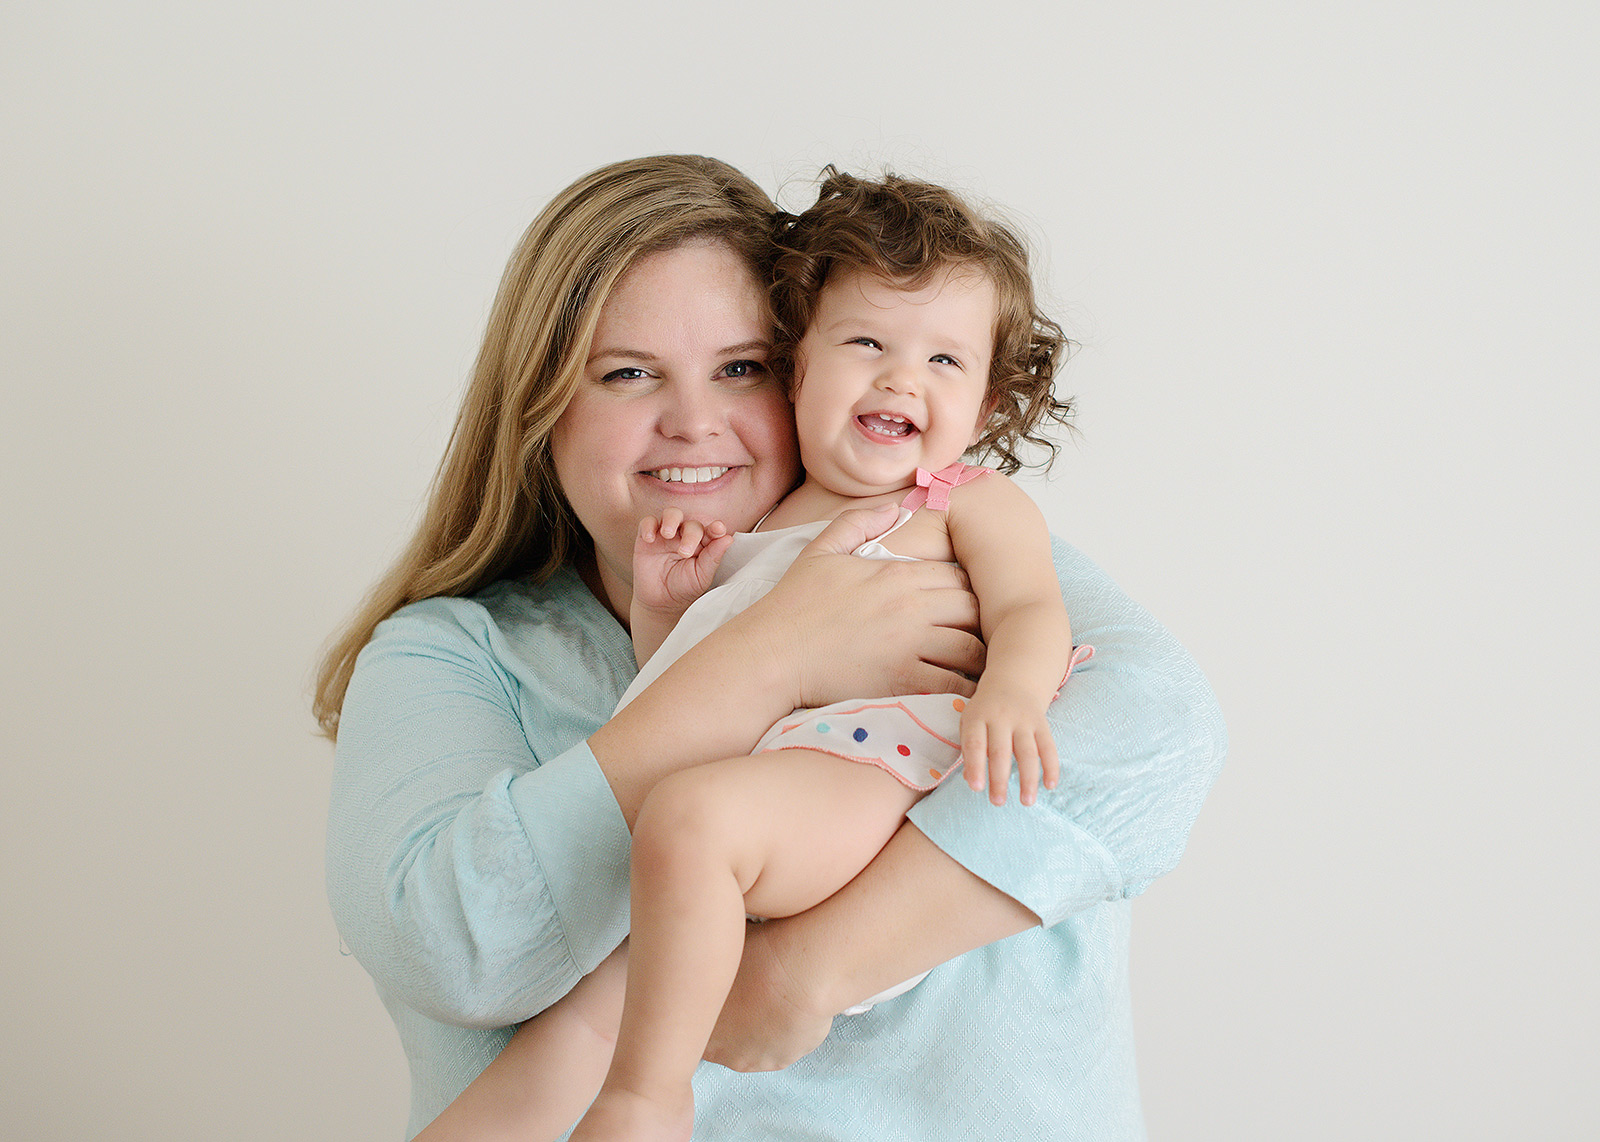 Mom Holds Baby Girl While Laughing Against White Background